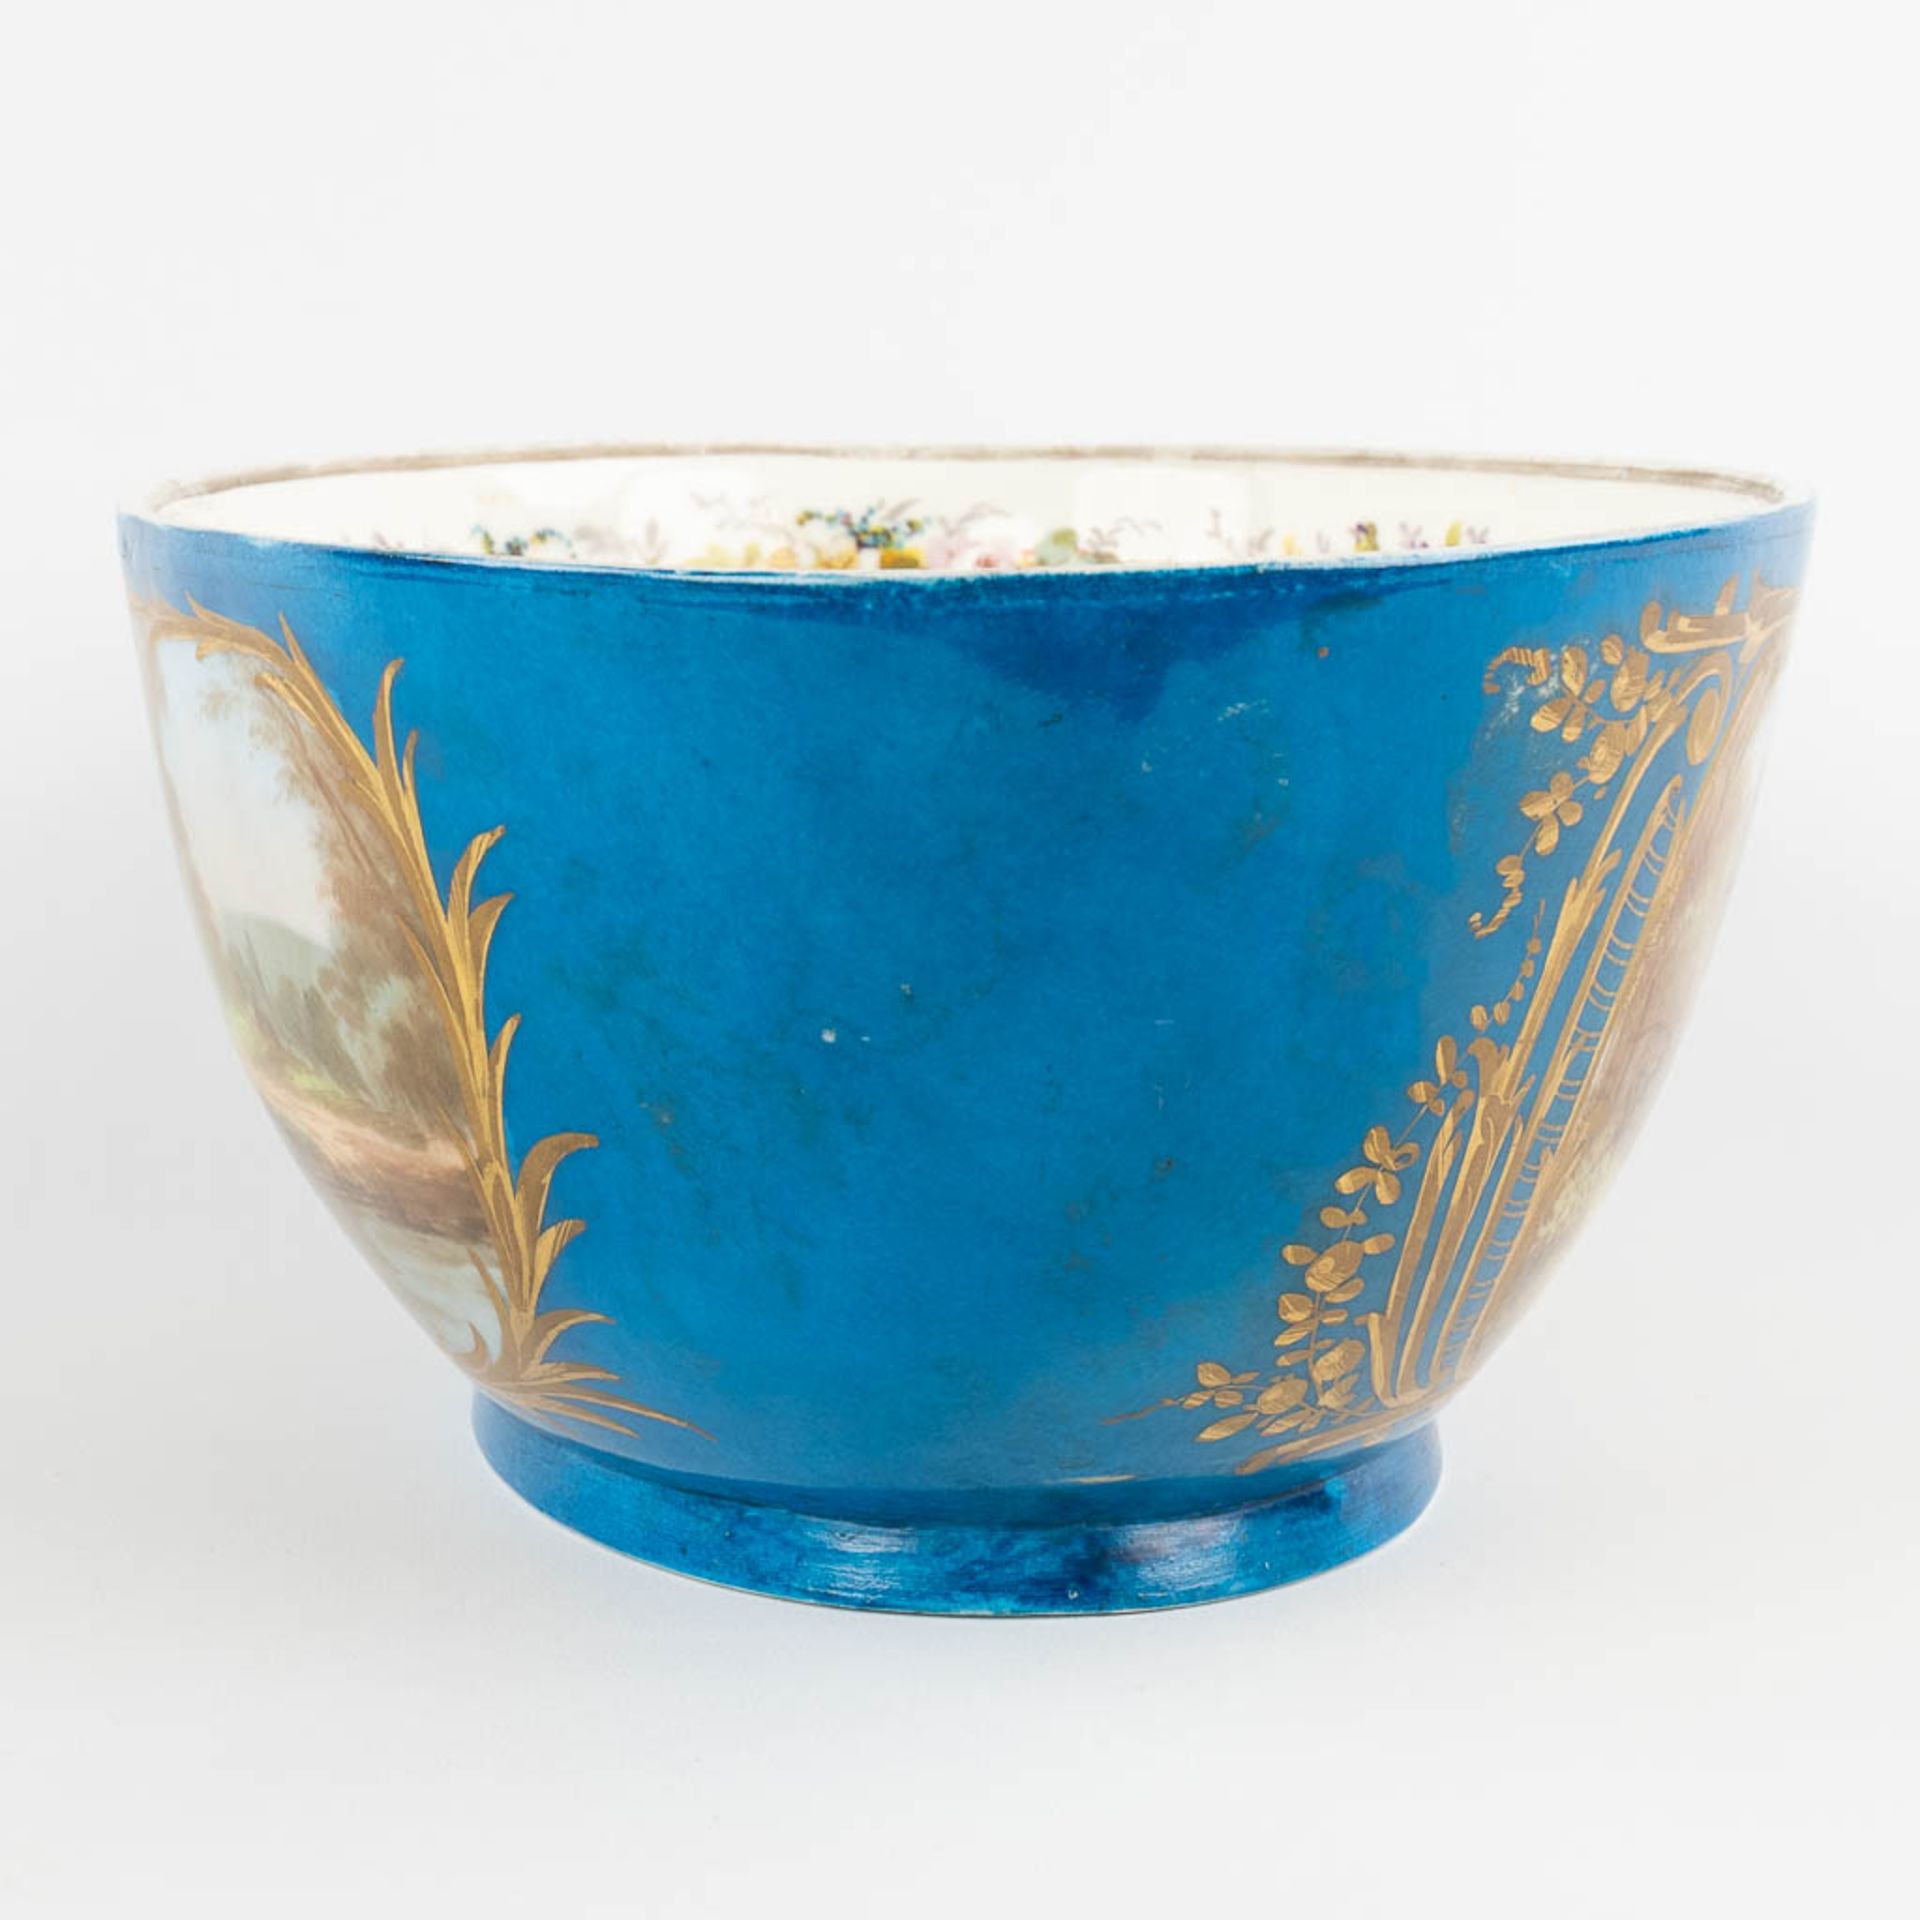 A large bowl, blue glaze with hand-painted decor, probably Limoges. (L:24 x W:39 x H:14 cm) - Image 4 of 12